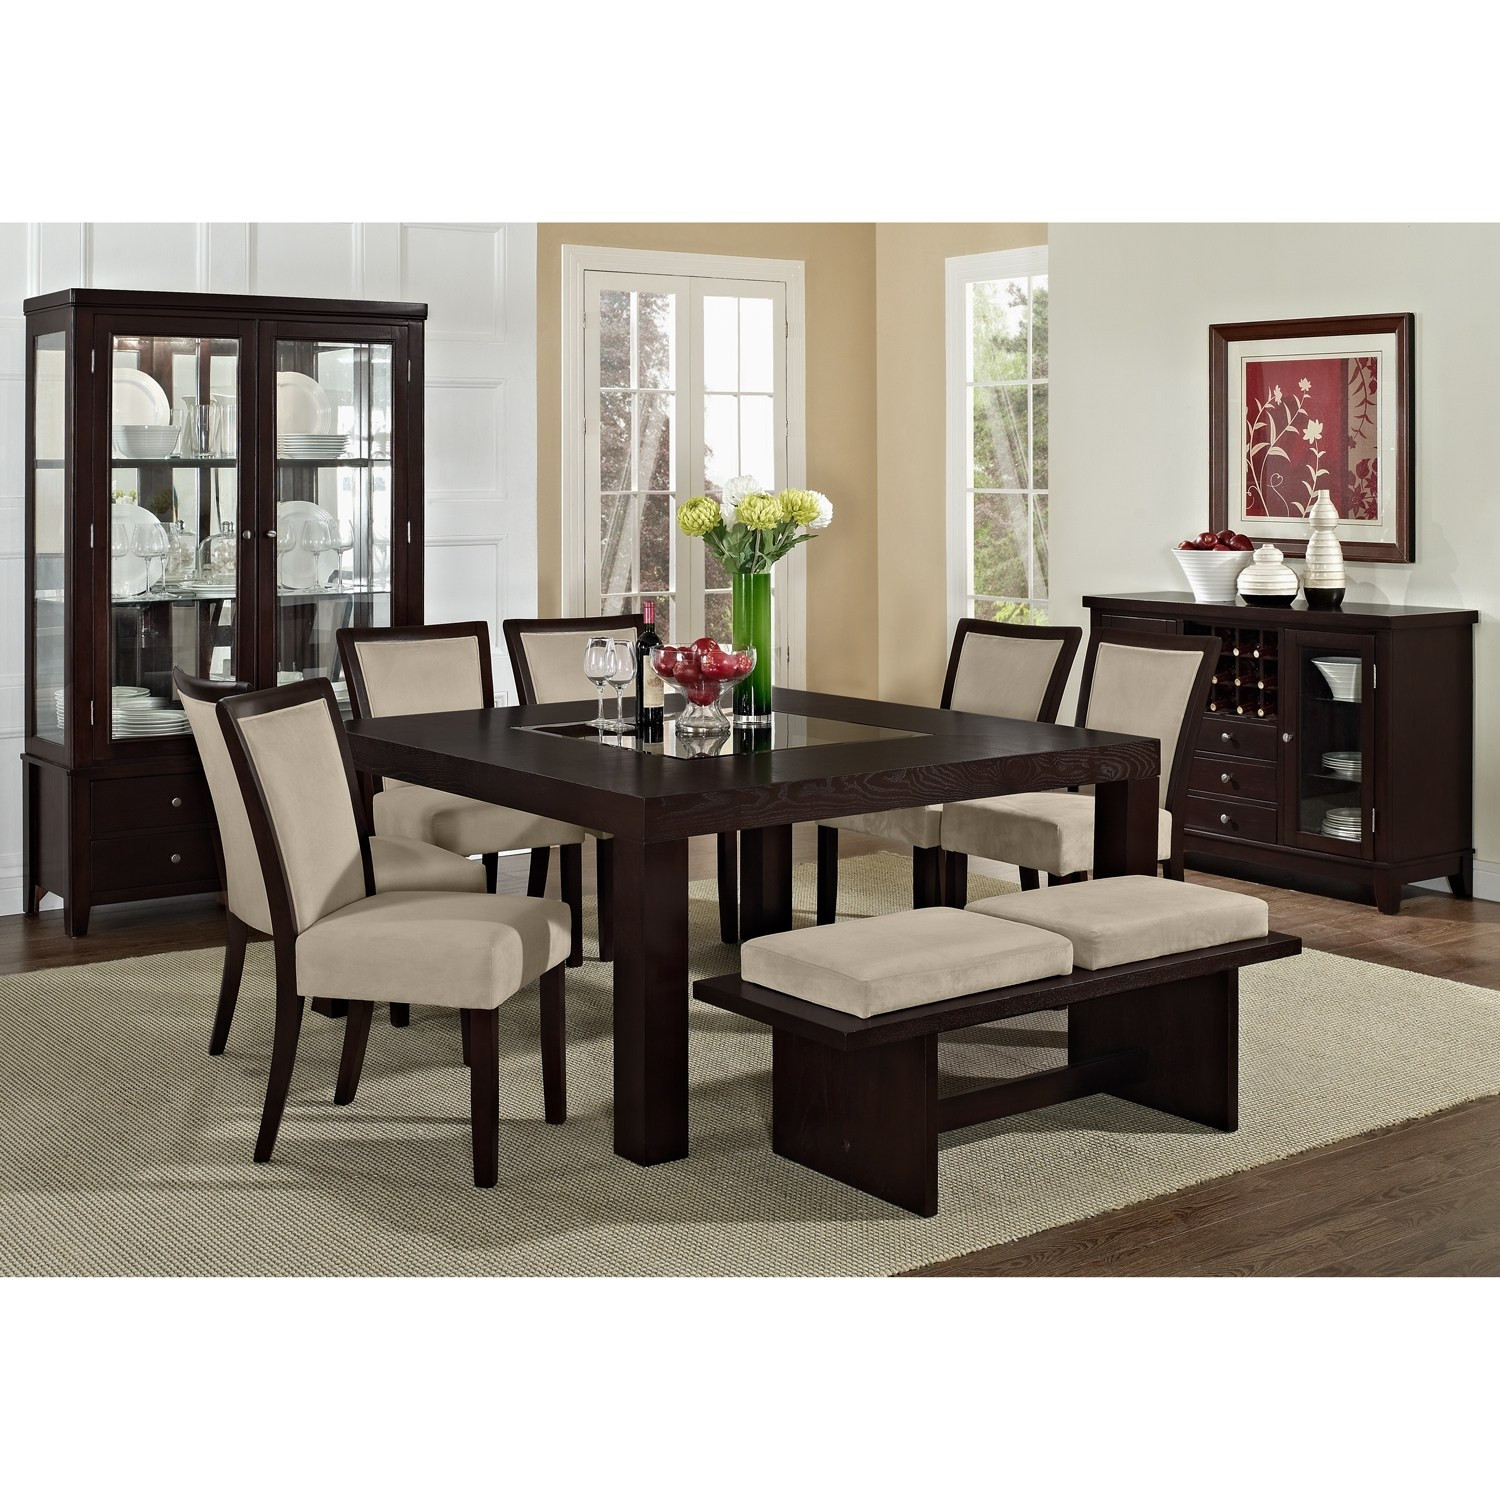 Value City Living Room Tables
 10 Awesome Designs of How to Make Value City Living Room